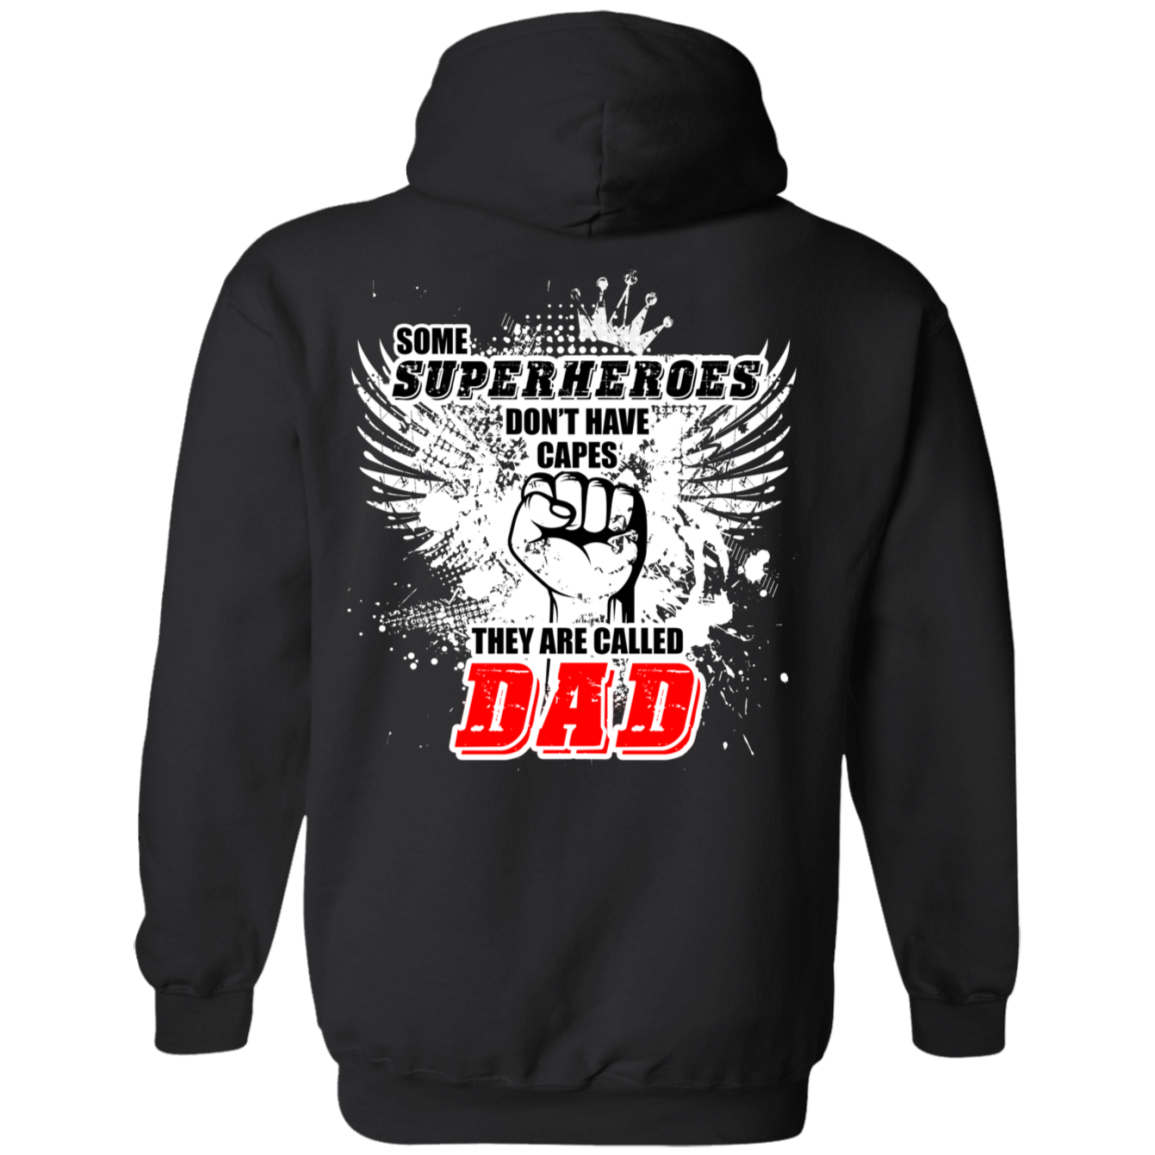 Some Superheroes Don't Have Capes, They Are Called Dad Hoodie, Cotton/Polyester, Black